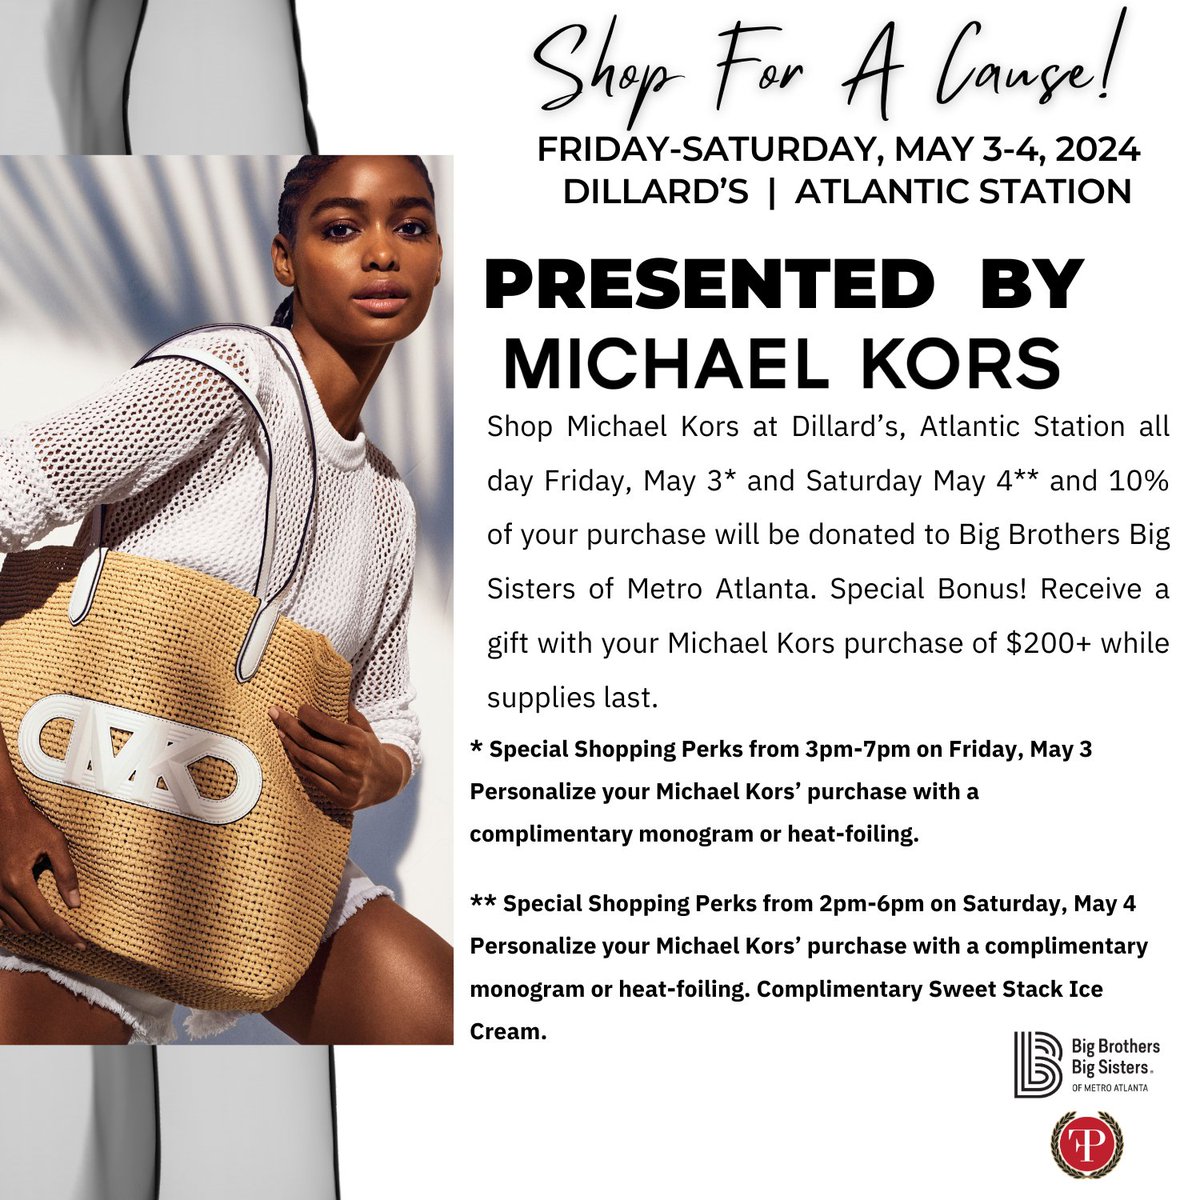 #ShopForACause this Friday and Saturday only. Tag us in your selfies 📸 & share how you shine! 💫 Your support helps us make an impact in the lives of youth in Metro Atlanta.

BIG Thanks to @MichaelKors, @Dillards Atlantic Station, & Sweet Stack Ice Cream
#BBBSATL #FP2024 #BeBig